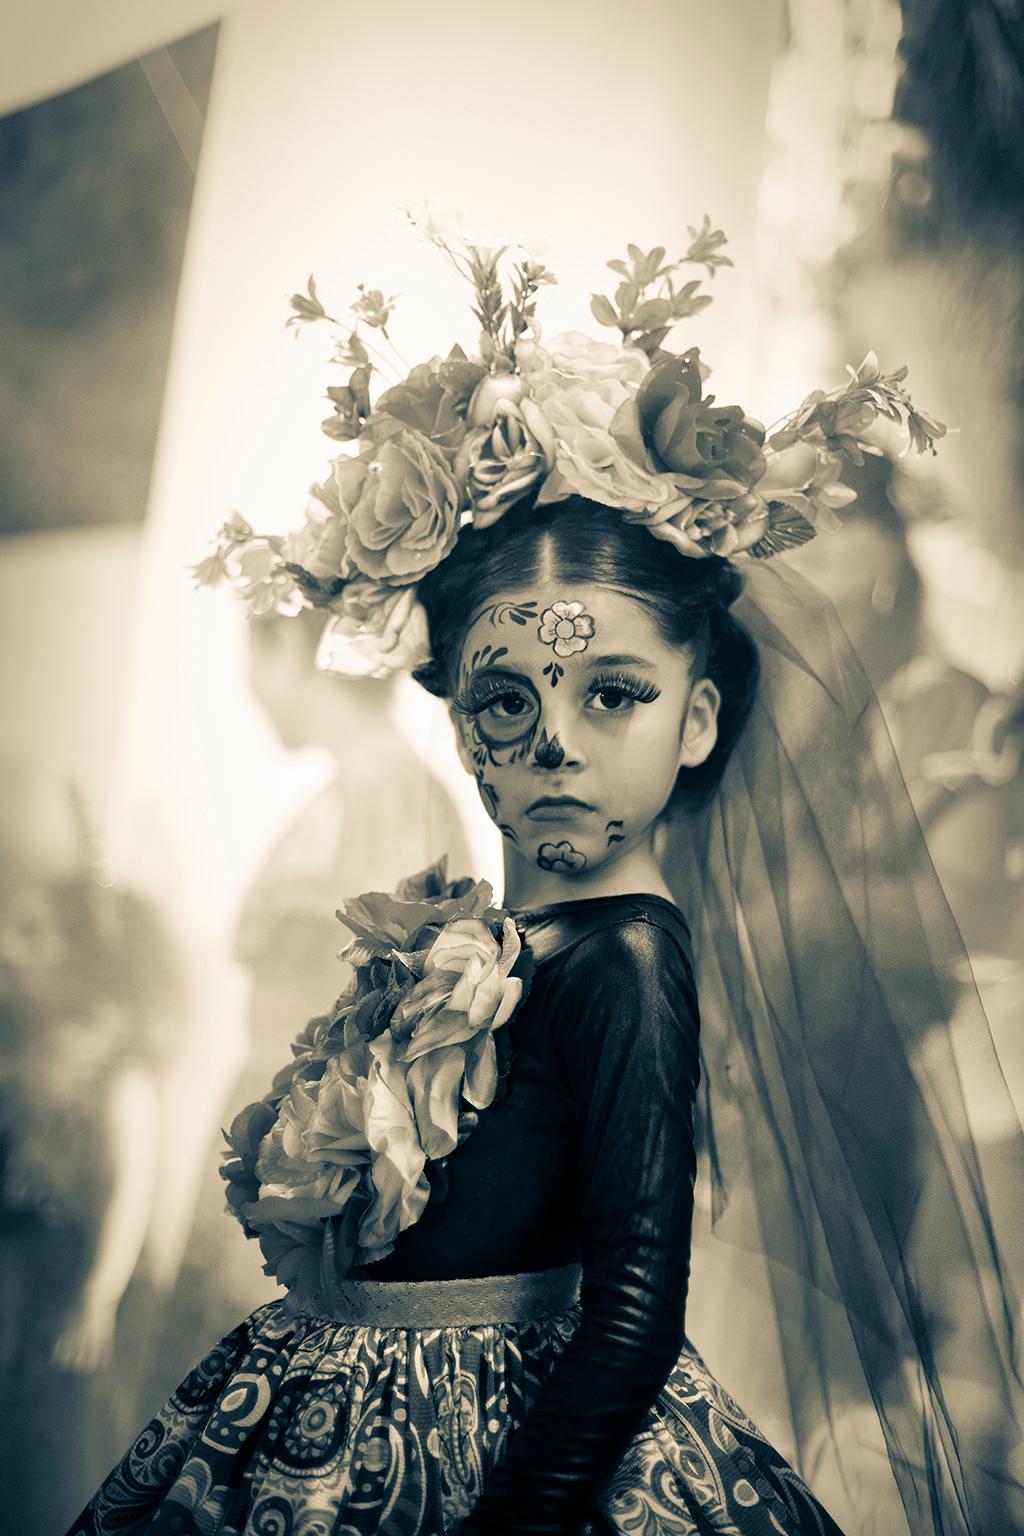  Cosmo Condina Portrait Photograph - She has attitude! Young girl dressed for Day of the Dead, B&W, Mexico, 2023